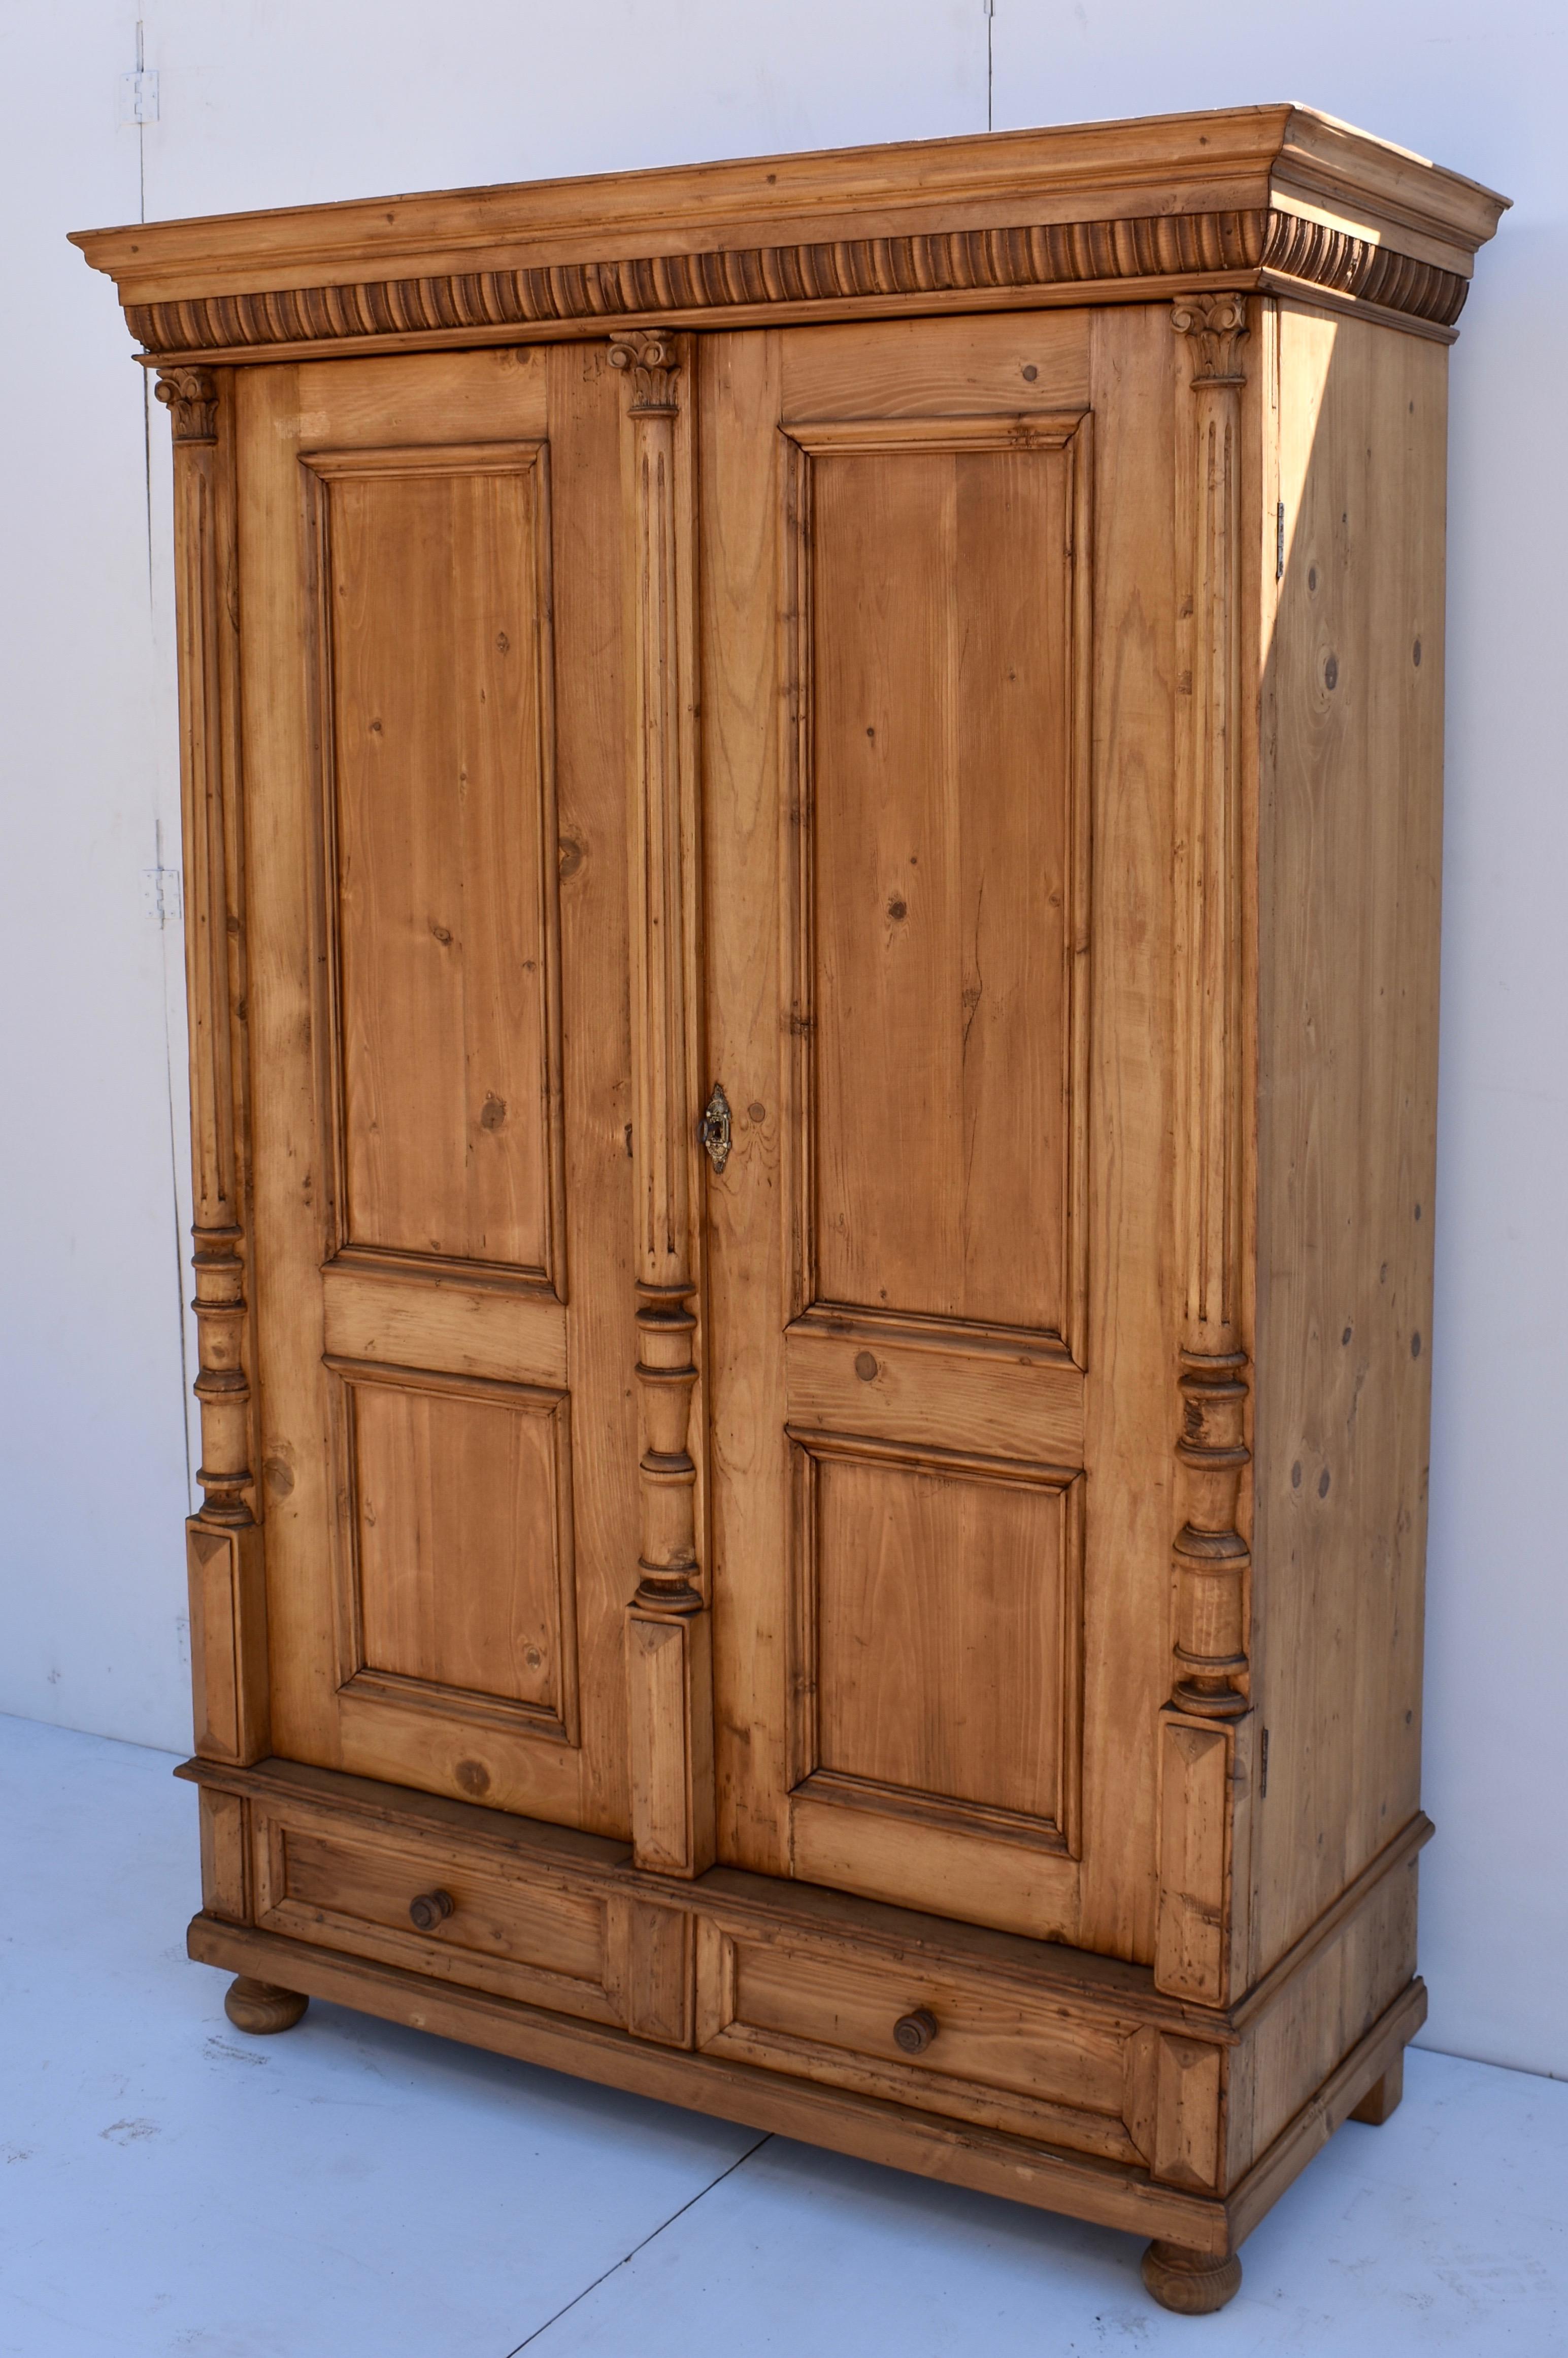 This is a very attractive example of a central European two door wardrobe. The crown molding is bold and decorative and sits above two doors, each with two panels. The doors are flanked and separated with applied fluted split columns on rectangular